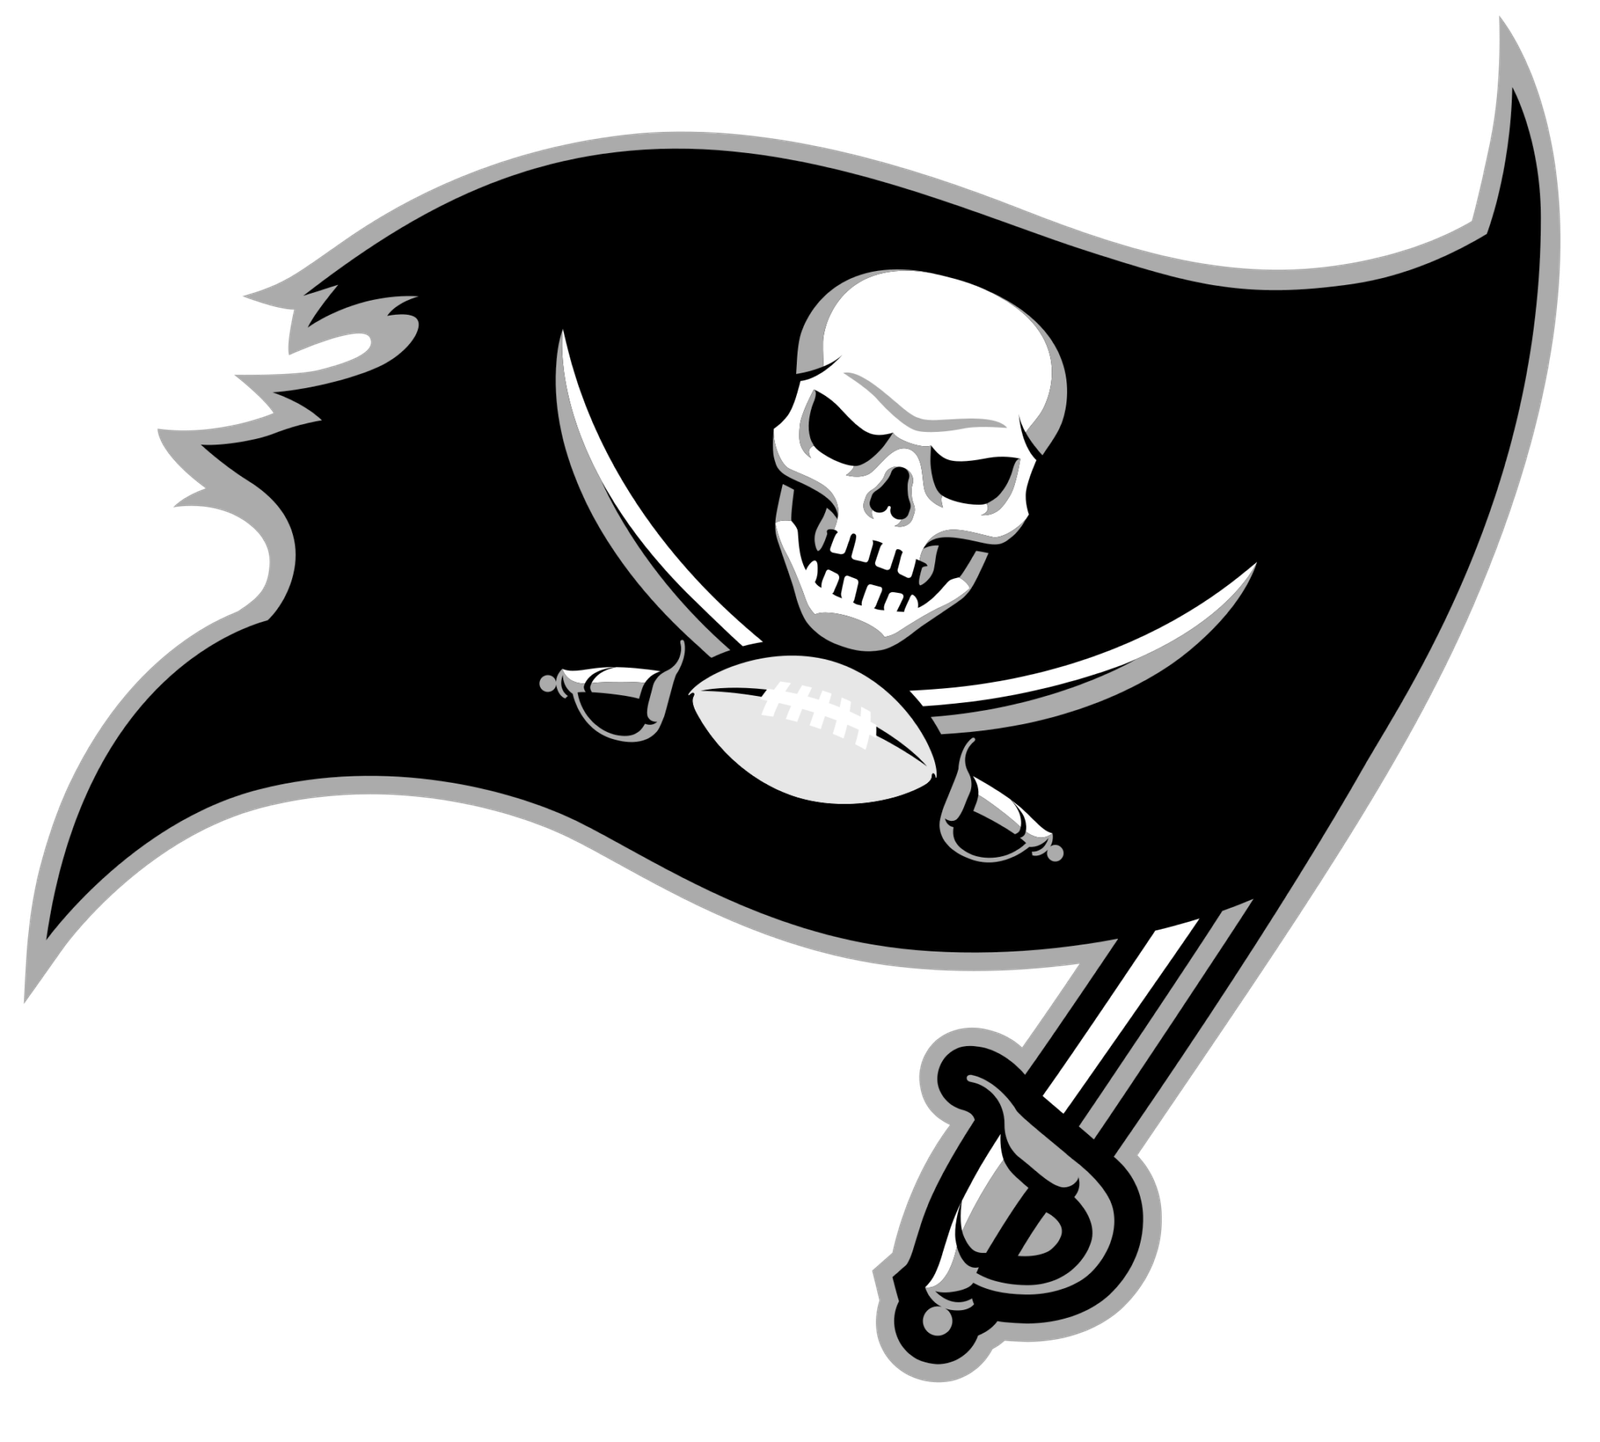 Tampa Bay Buccaneers logo & the history of the team | LogoMyWay